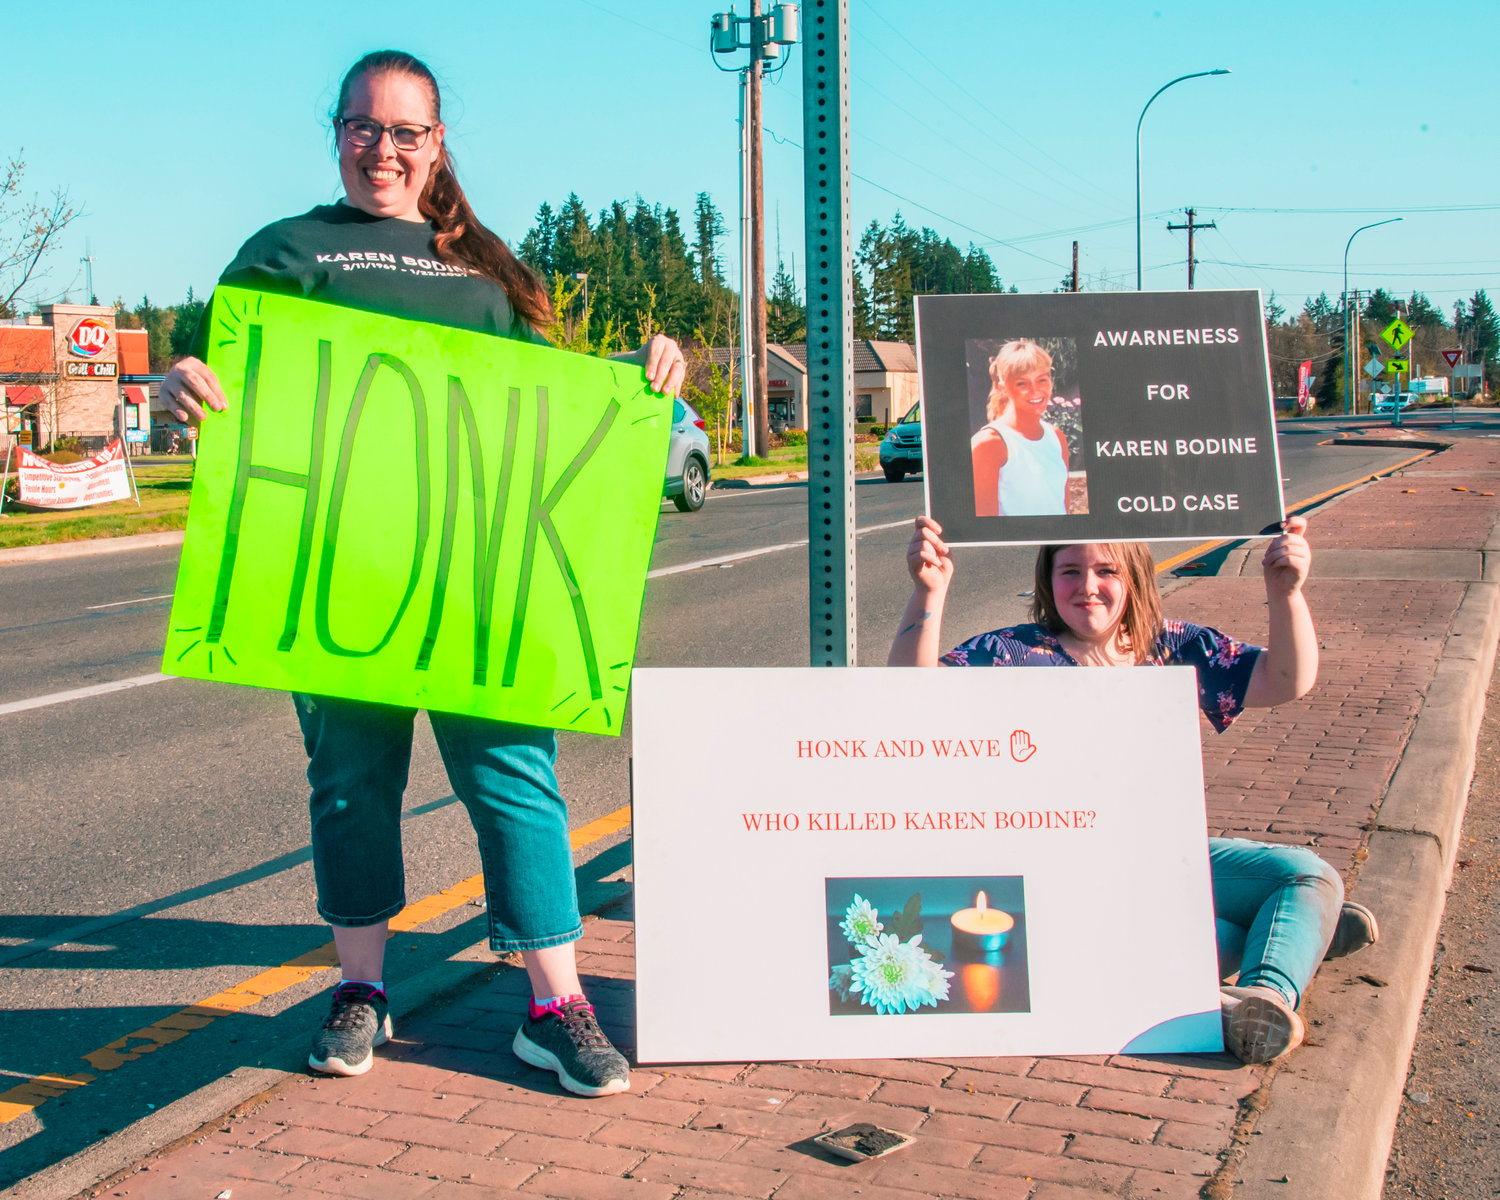 Heather Miller and Alexis Hartman hold signs during a honk-and-wave event to bring awareness for the cold case of Karen Bodine on Saturday in Grand Mound.